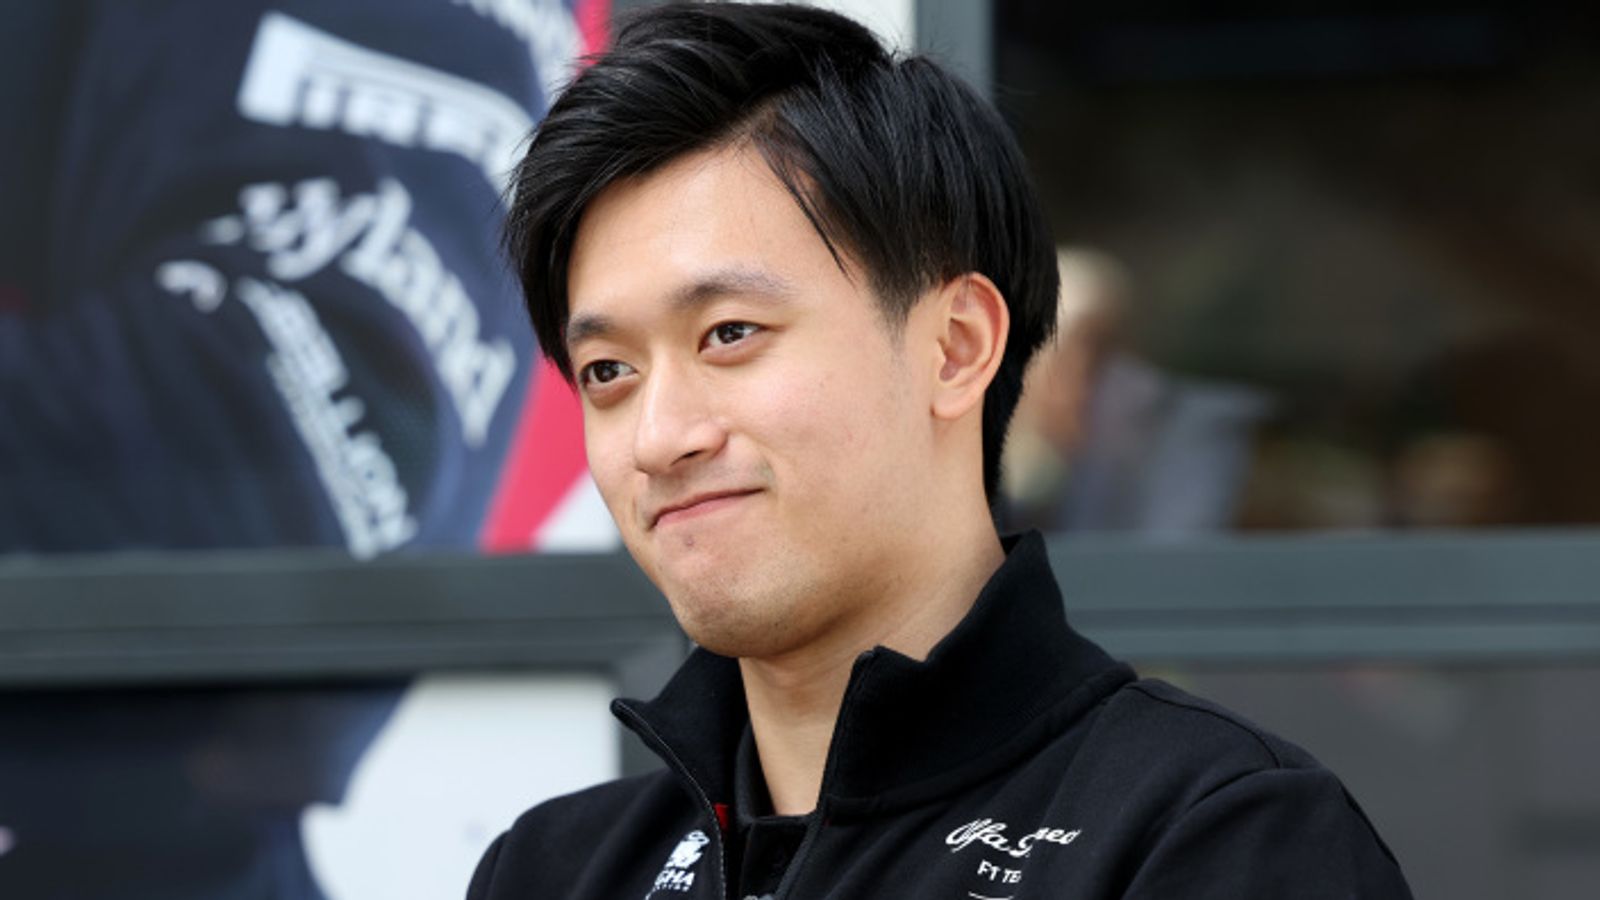 Chinese Grand Prix: Zhou Guanyu confident F1’s popularity is growing in China despite cancelled race